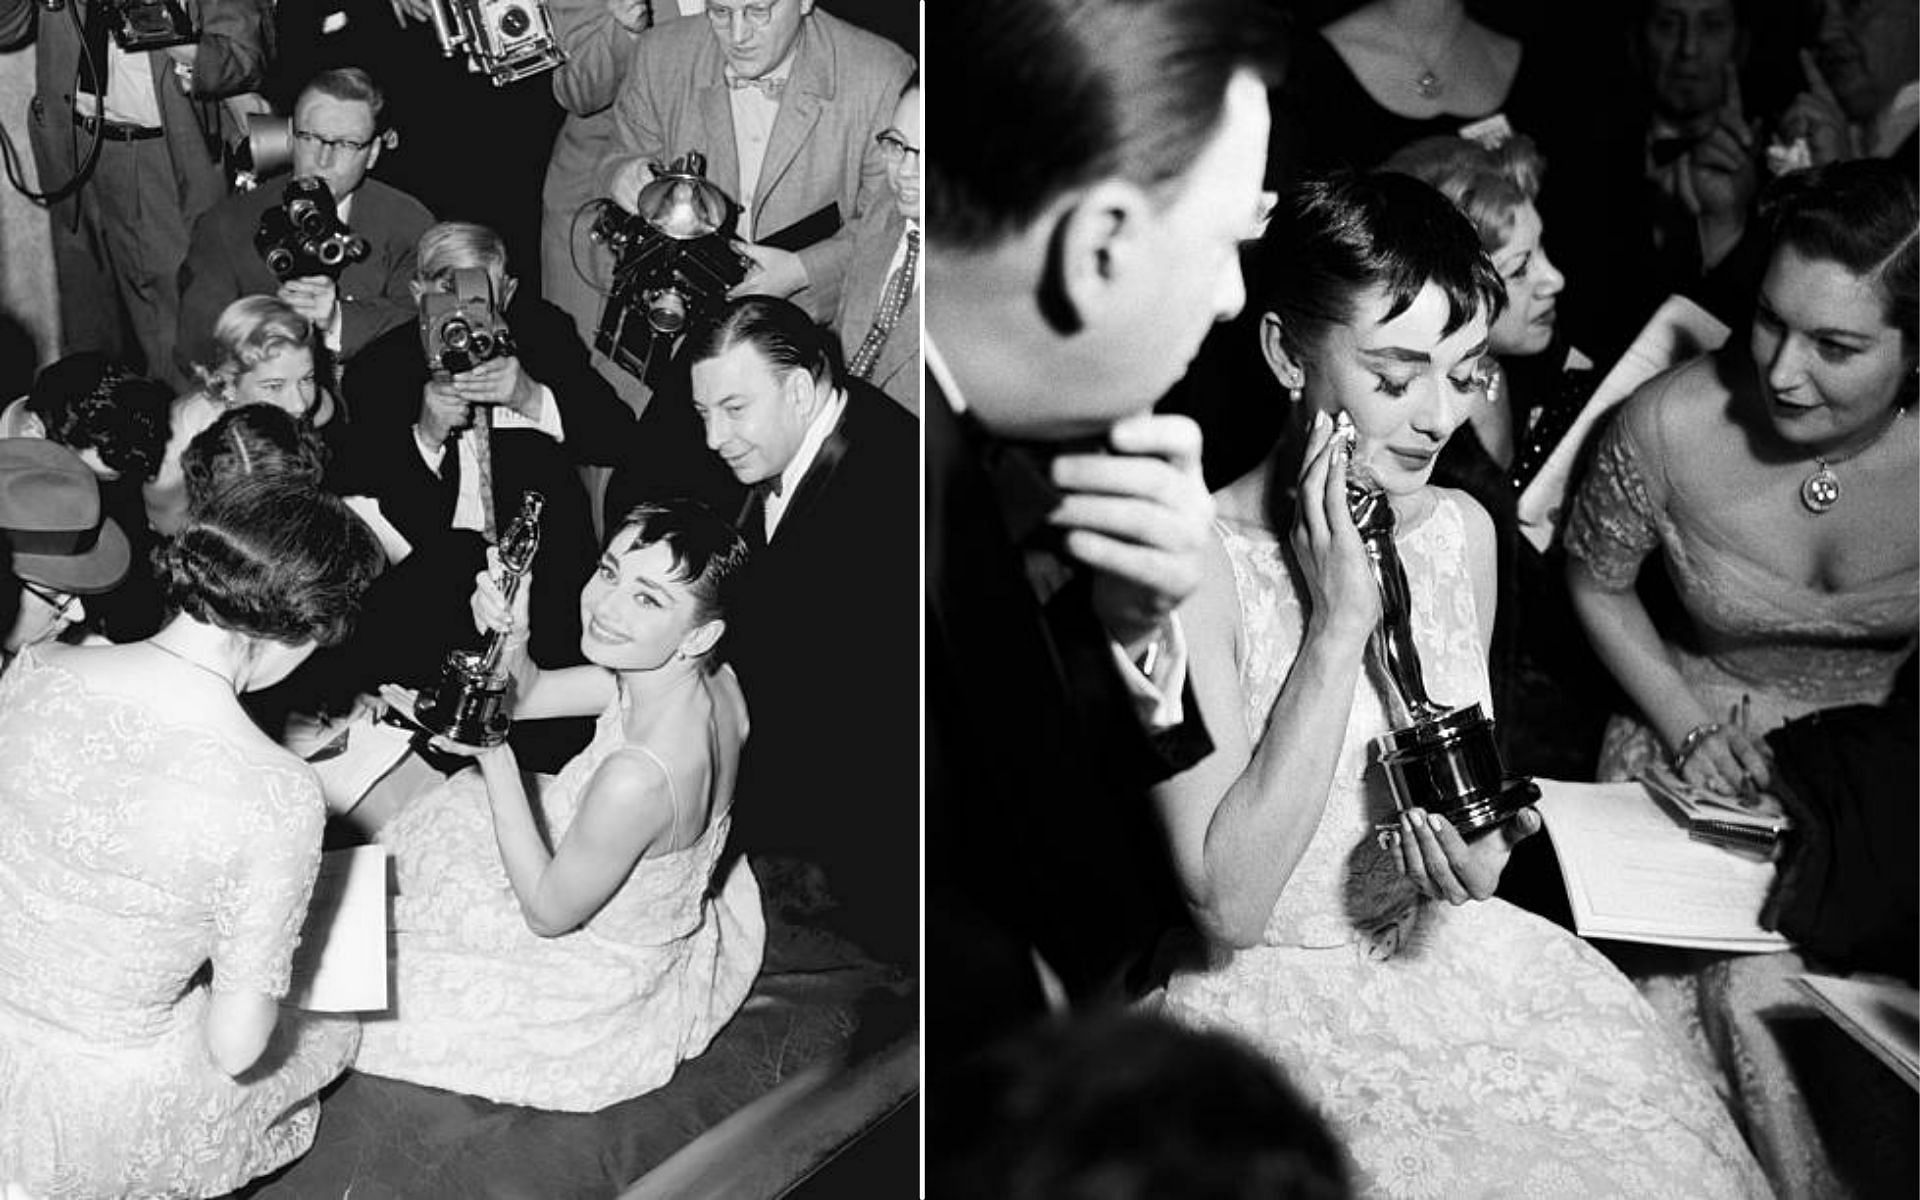 Audrey Hepburn flaunting her Academy Award for Best Actress in 1954 (Image via Getty Images)